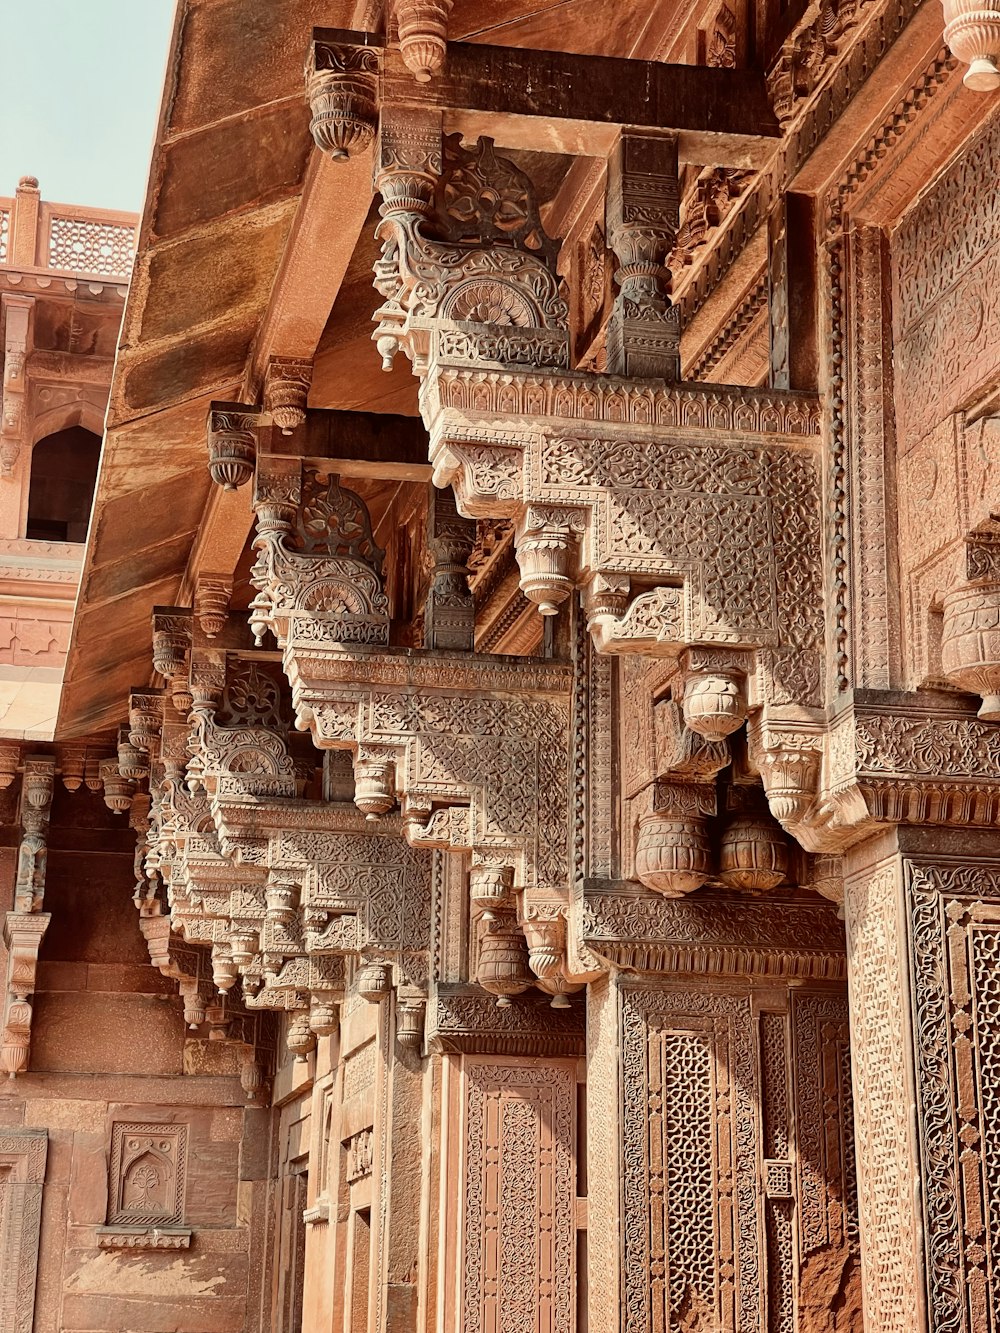 a wooden building with intricate carvings on it